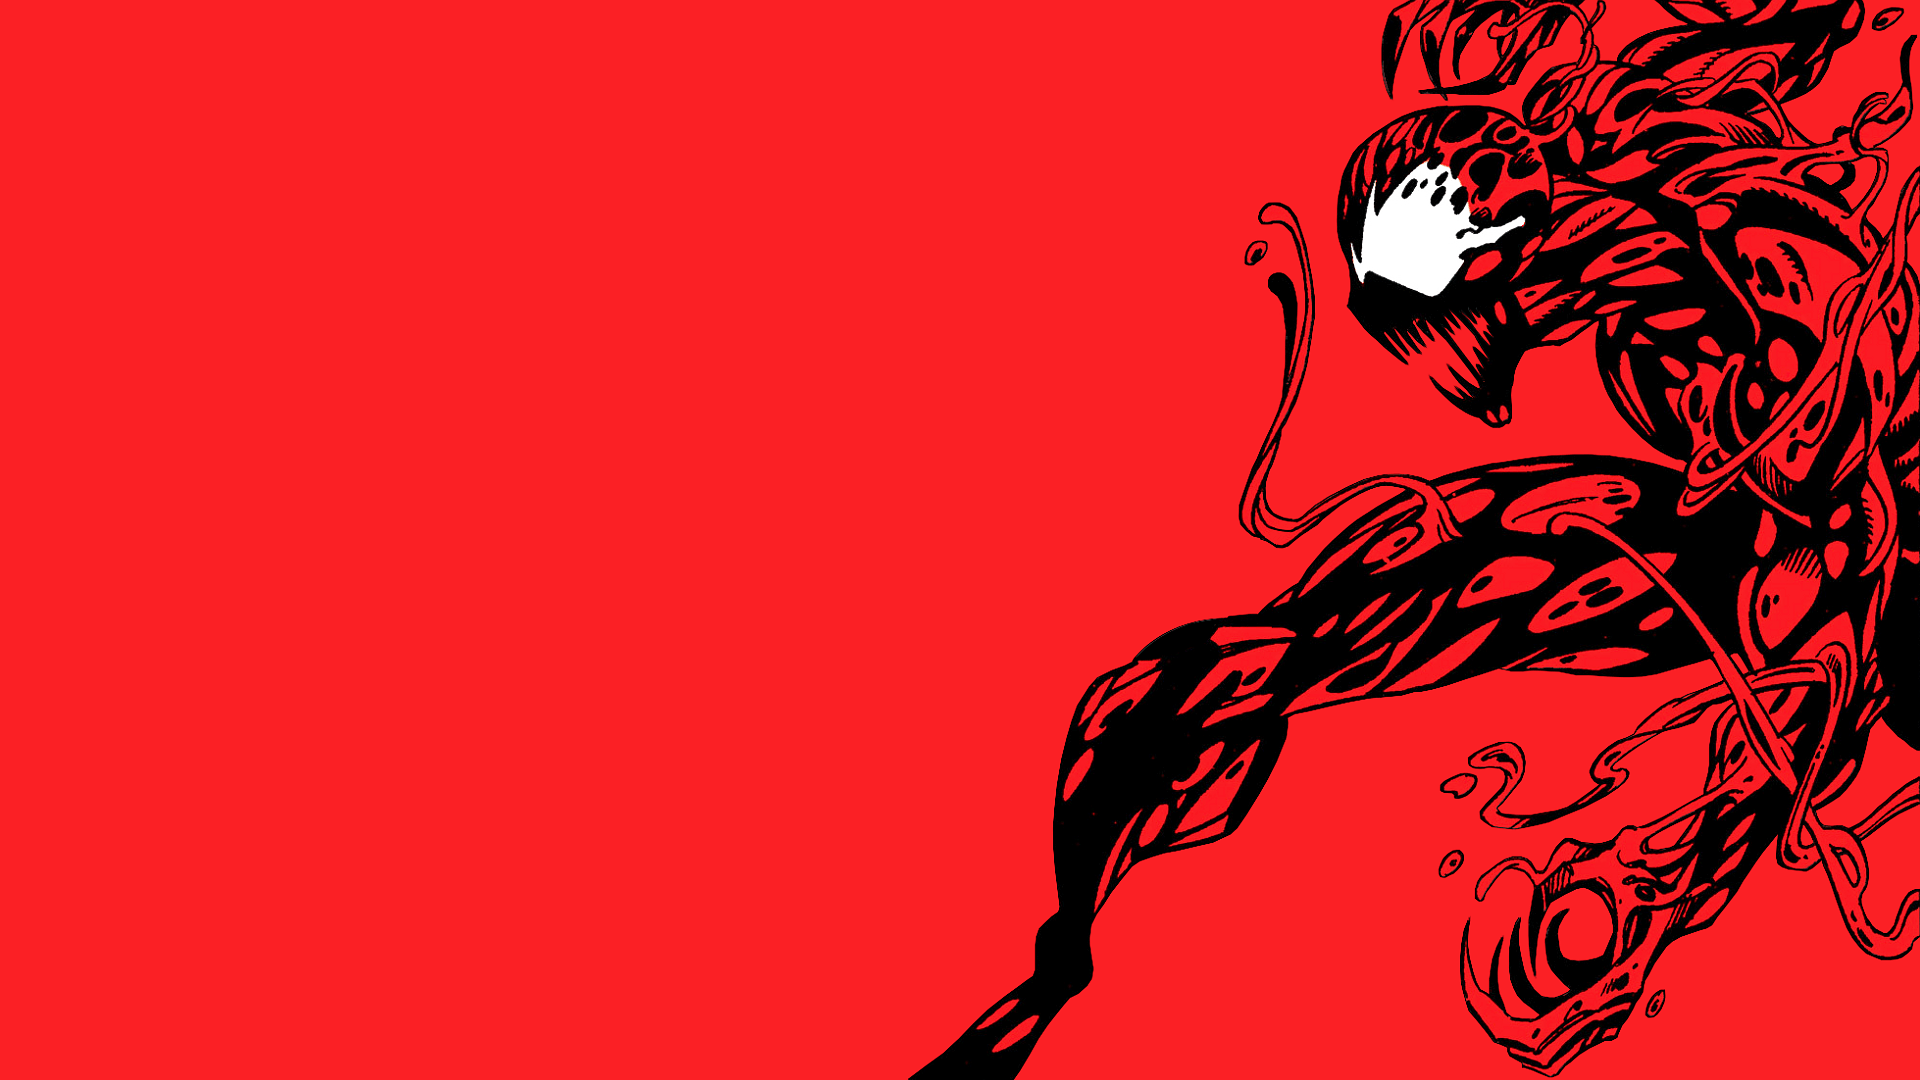 Carnage Minimalist Wallpapers Top Free Carnage Minimalist Backgrounds Wallpaperaccess